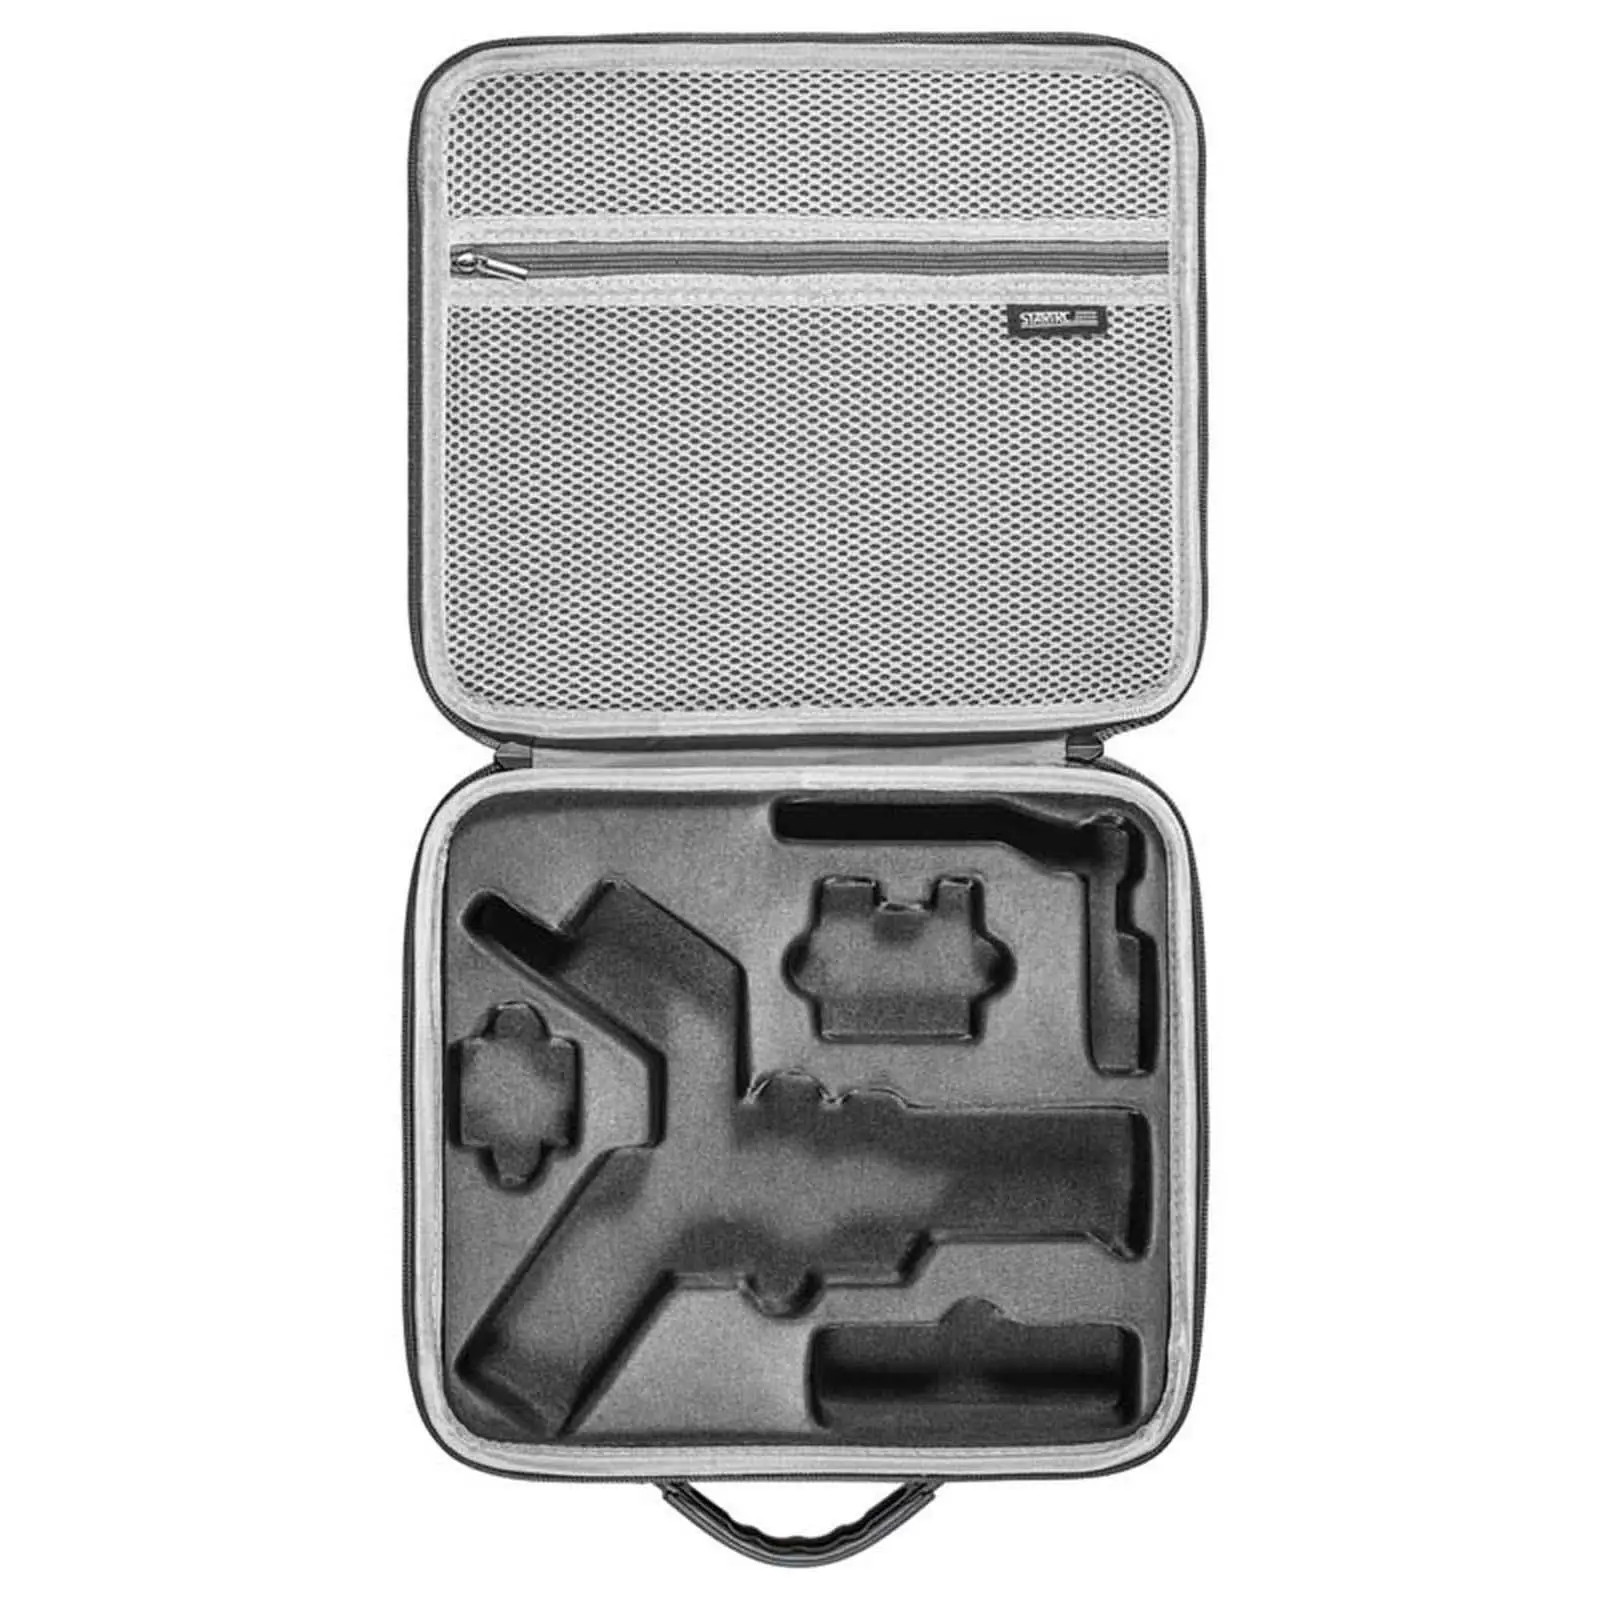 Carrying Case for Ronin RS 3 Mini Portable Adjustable Strap Travel Waterproof Handheld Camera Stabilizer Storage Bag